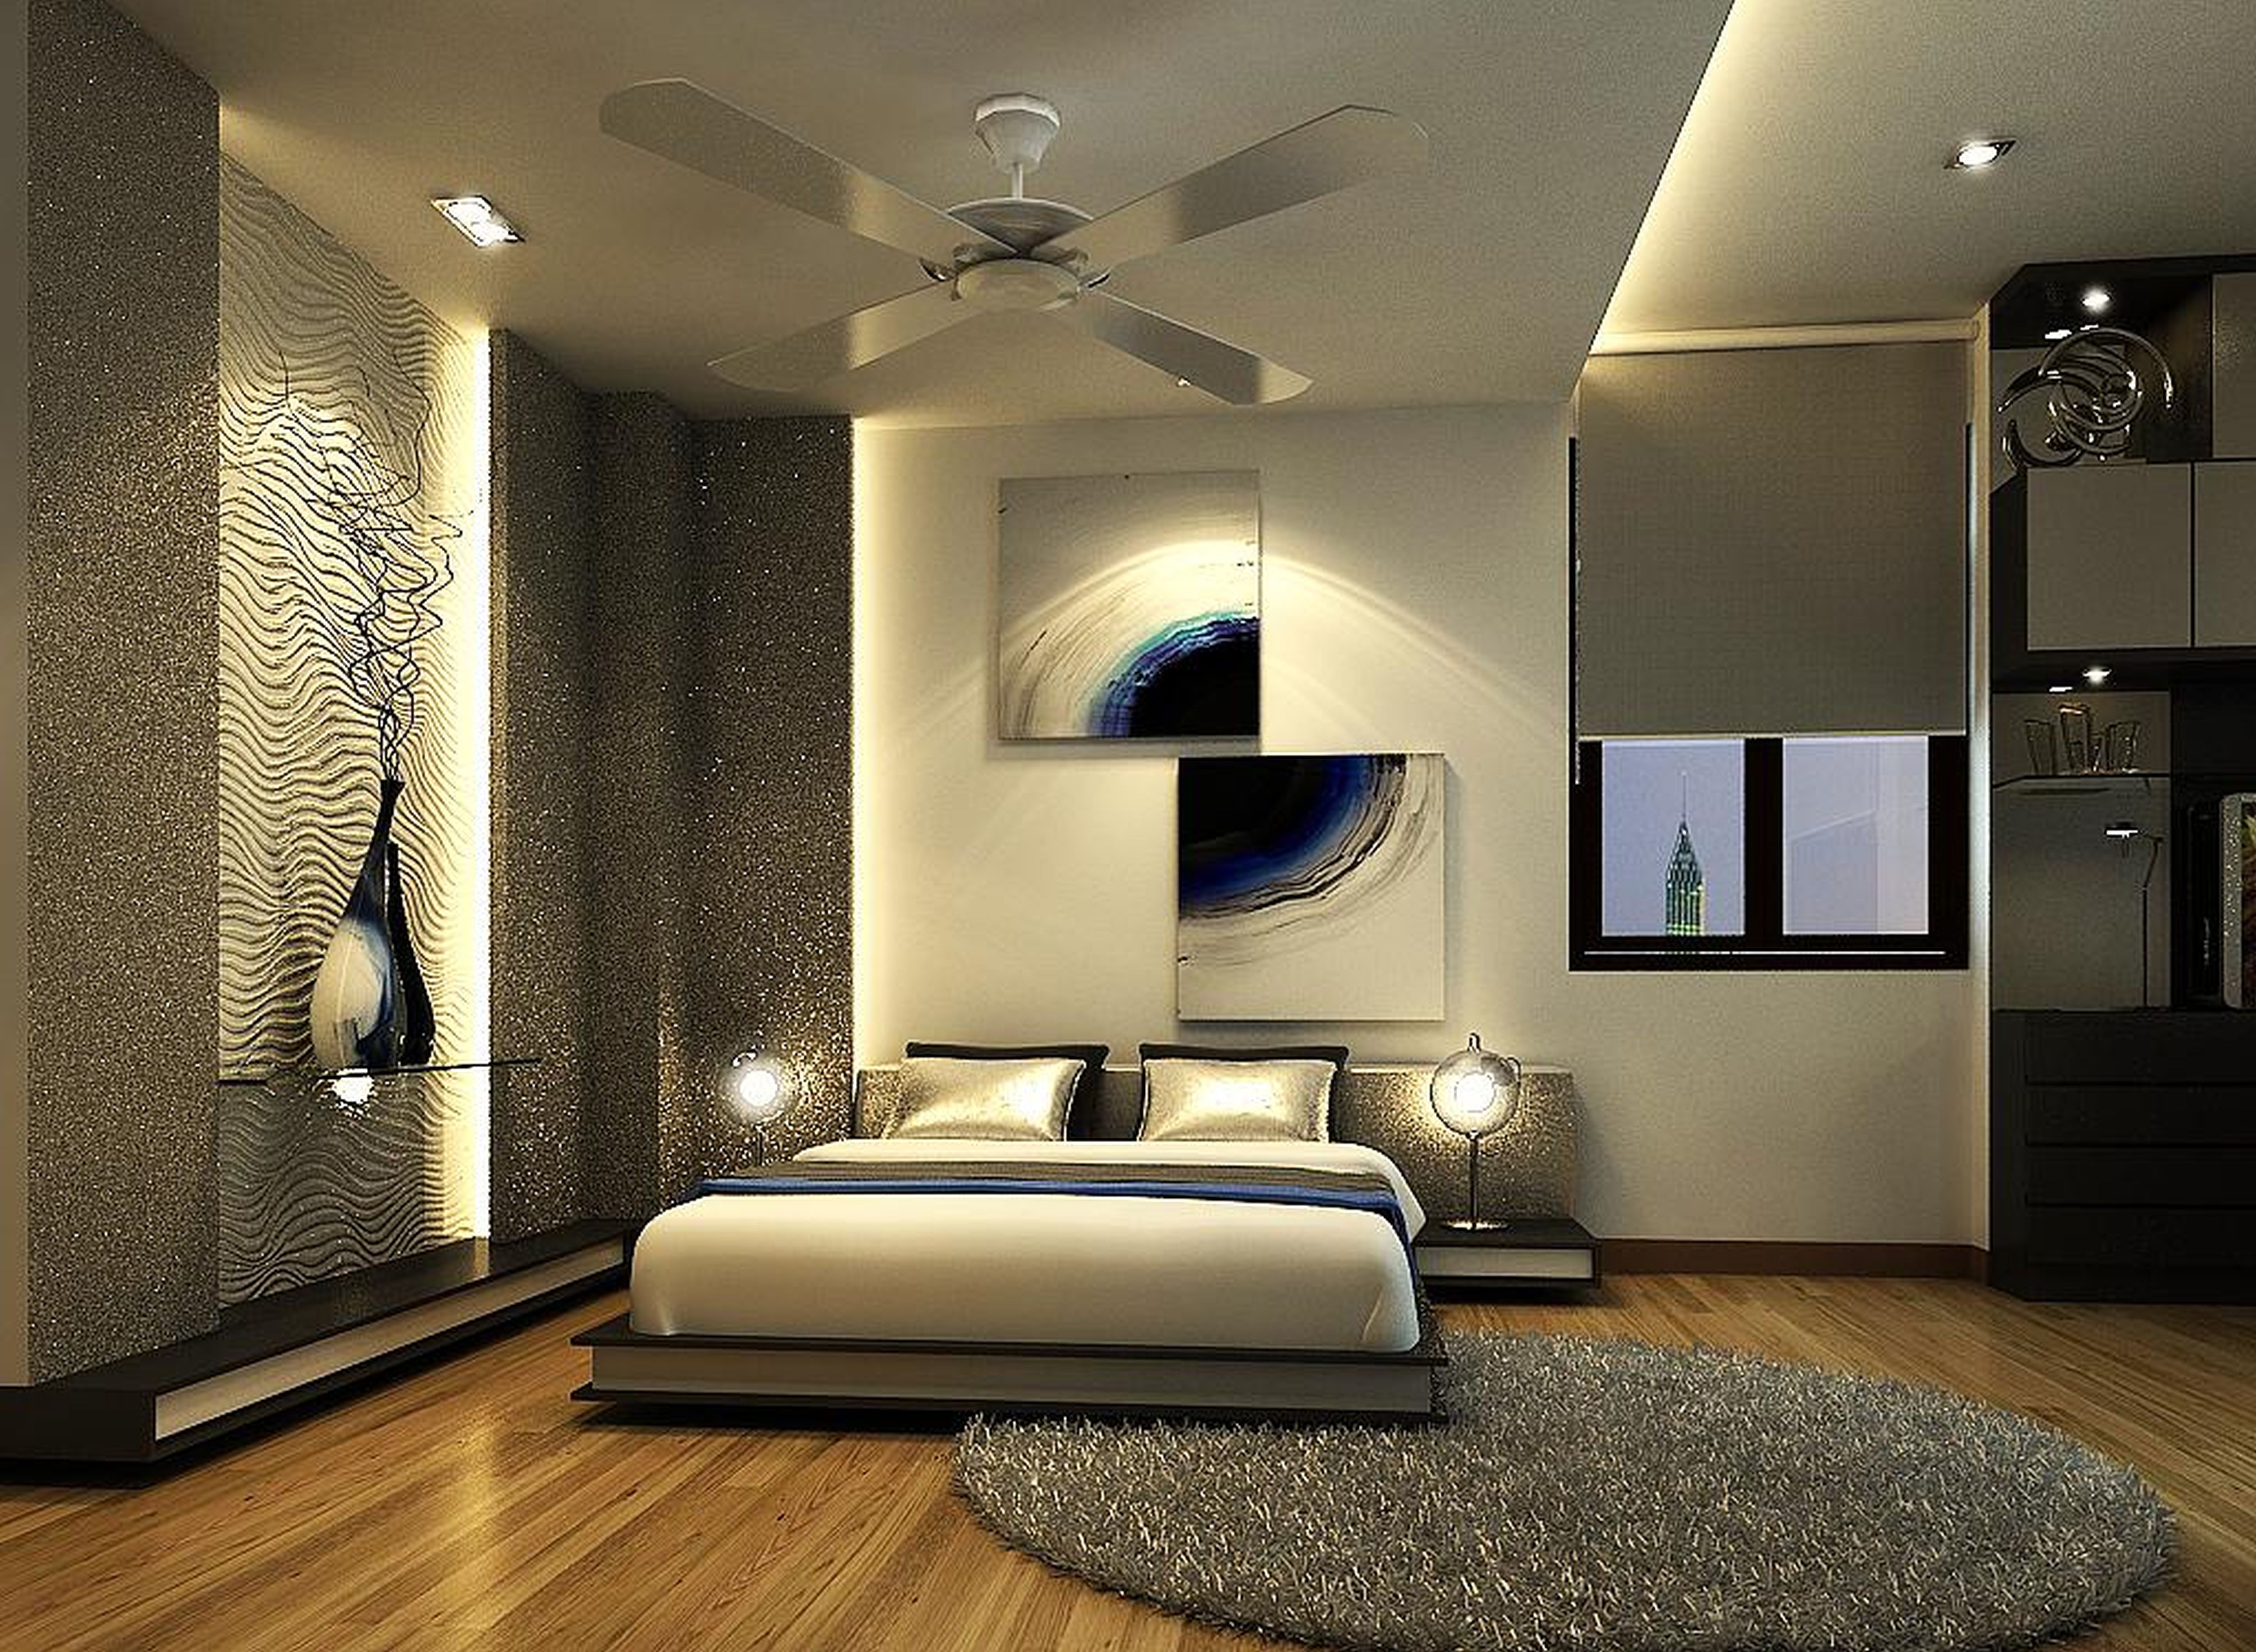 Bedroom Design Gallery For Inspiration The WoW Style